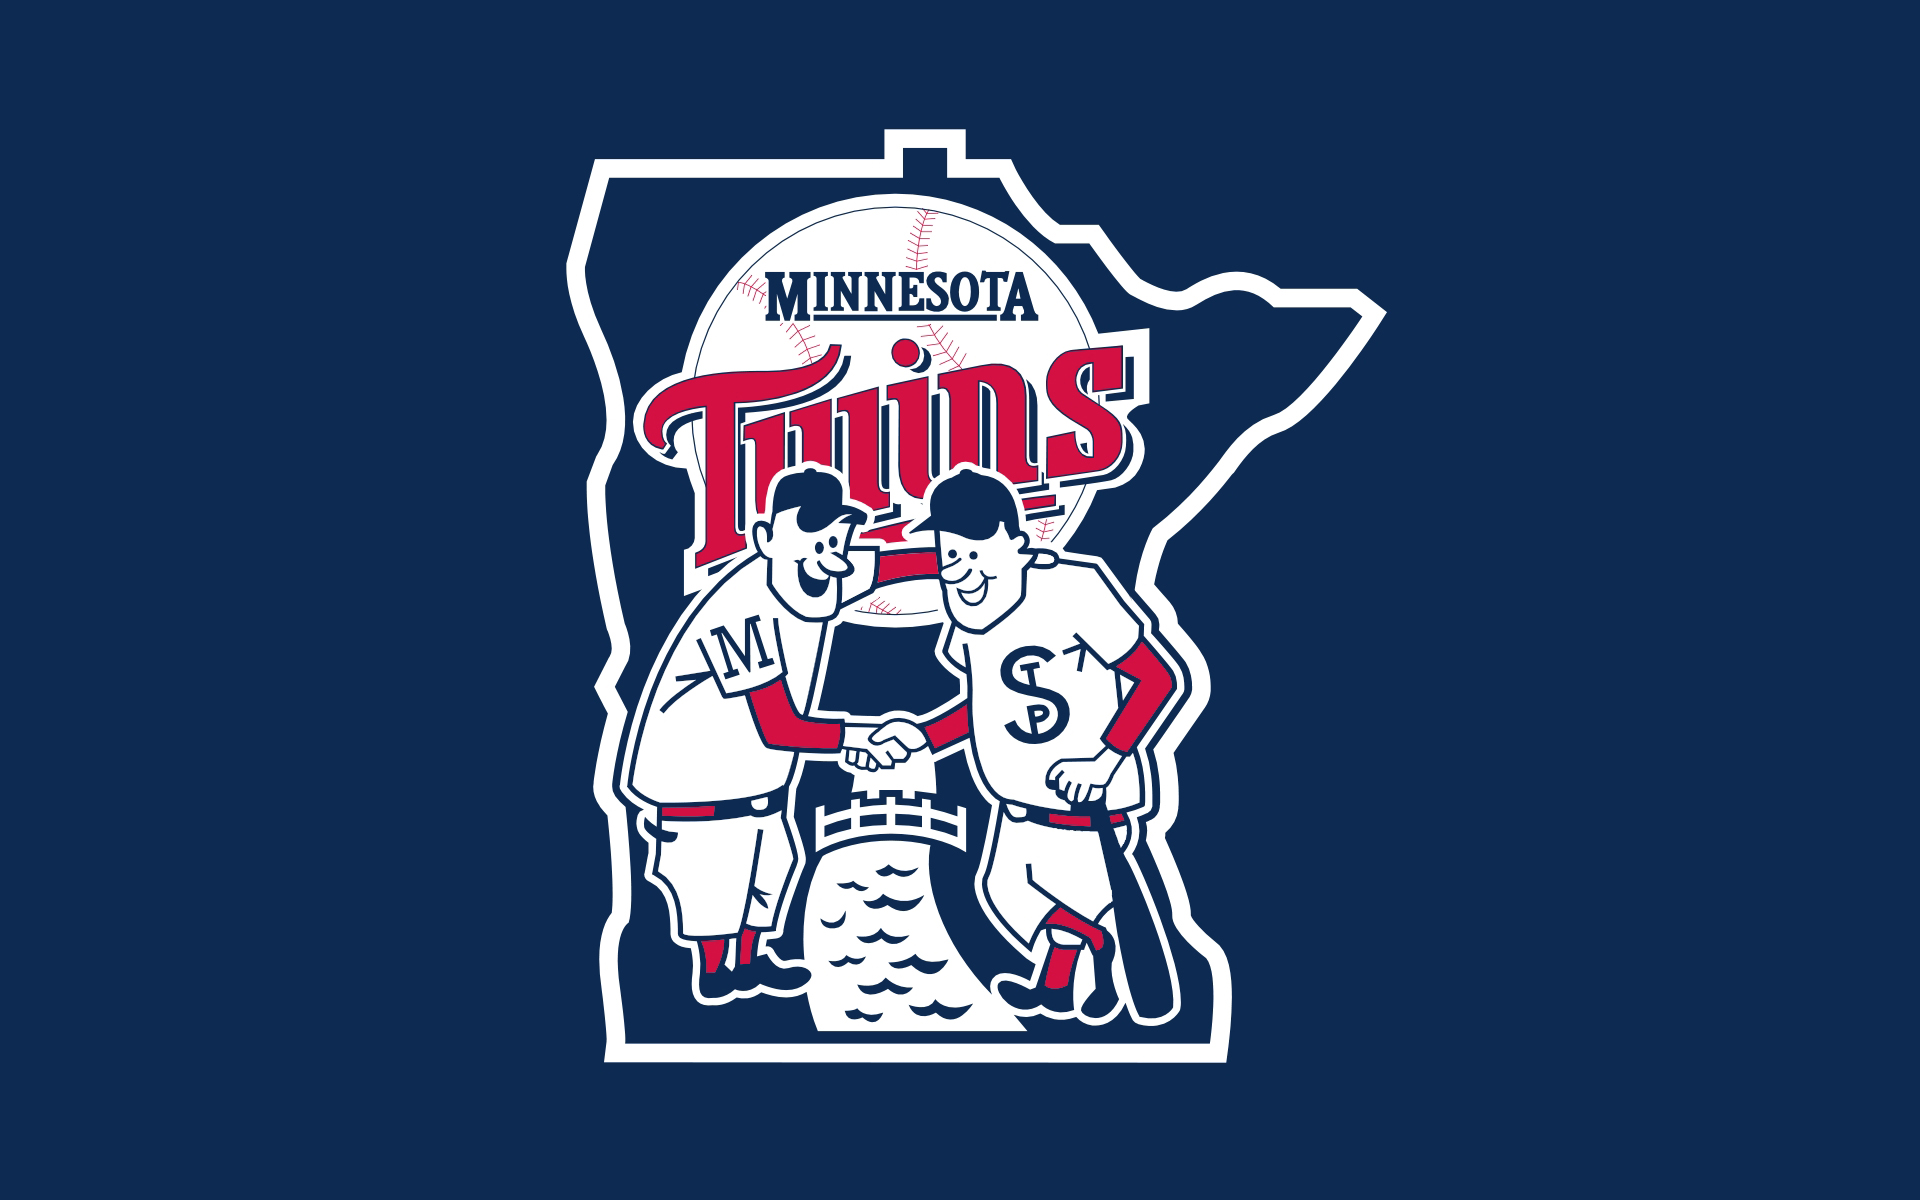 Mn Twins Game Wallpaper Mixed HD Game Wallpapers